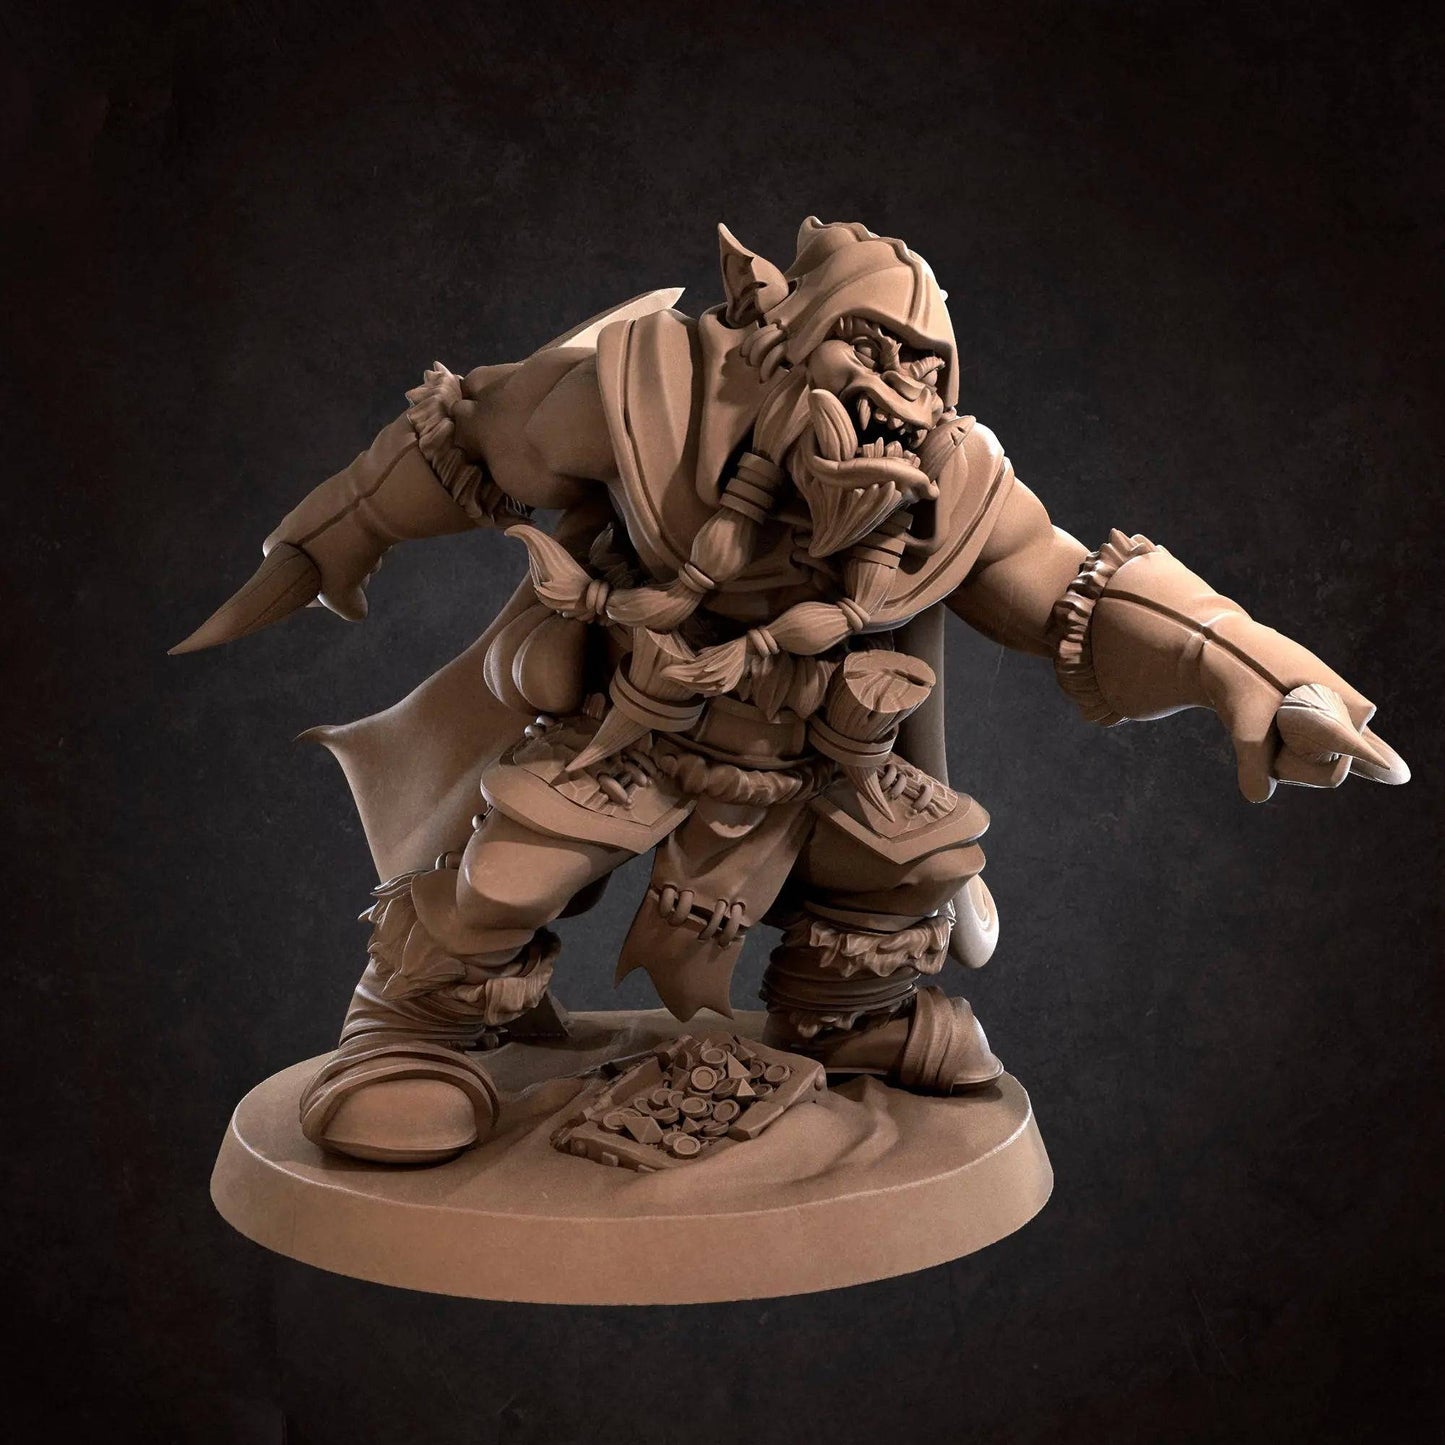 Bugbear Reaver, Rogue with Two Daggers | D&D Miniature TTRPG Character | Bite the Bullet - Tattles Told 3D